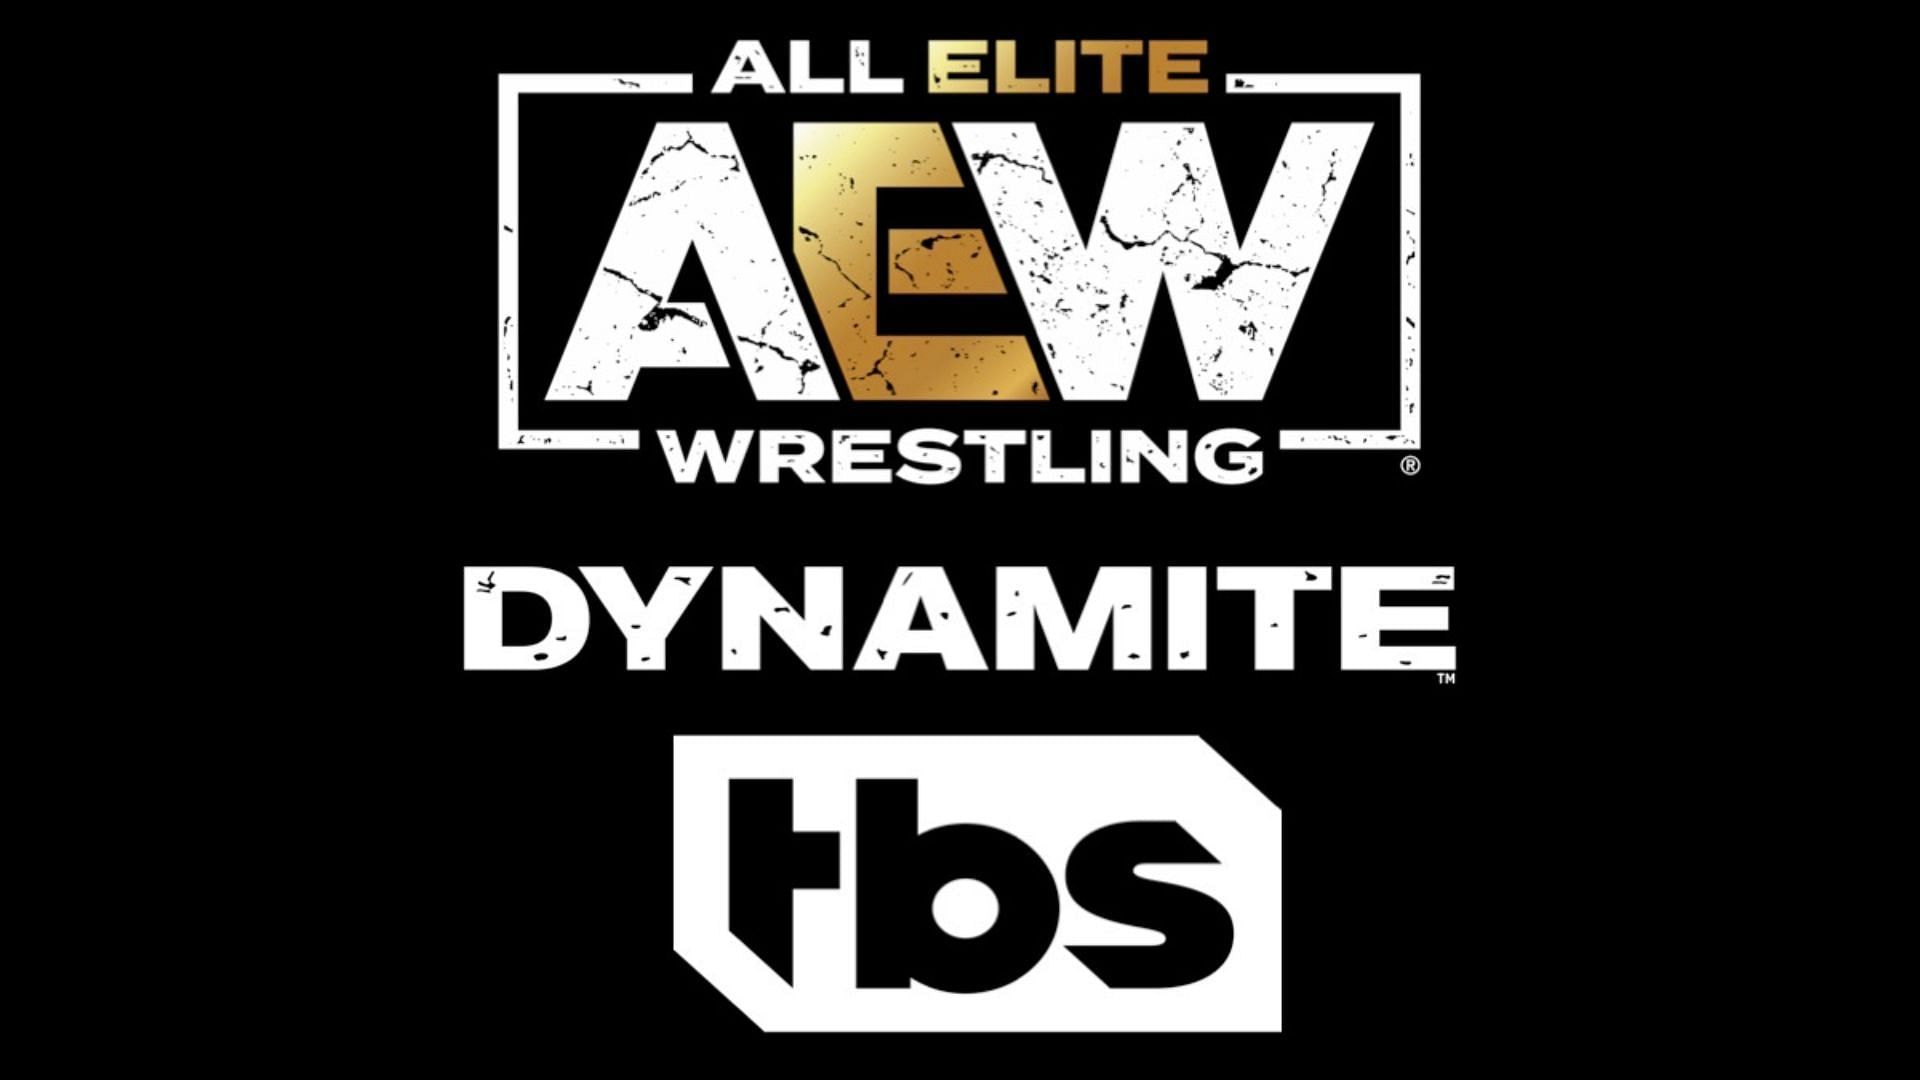 Dynamite moved to TBS in January